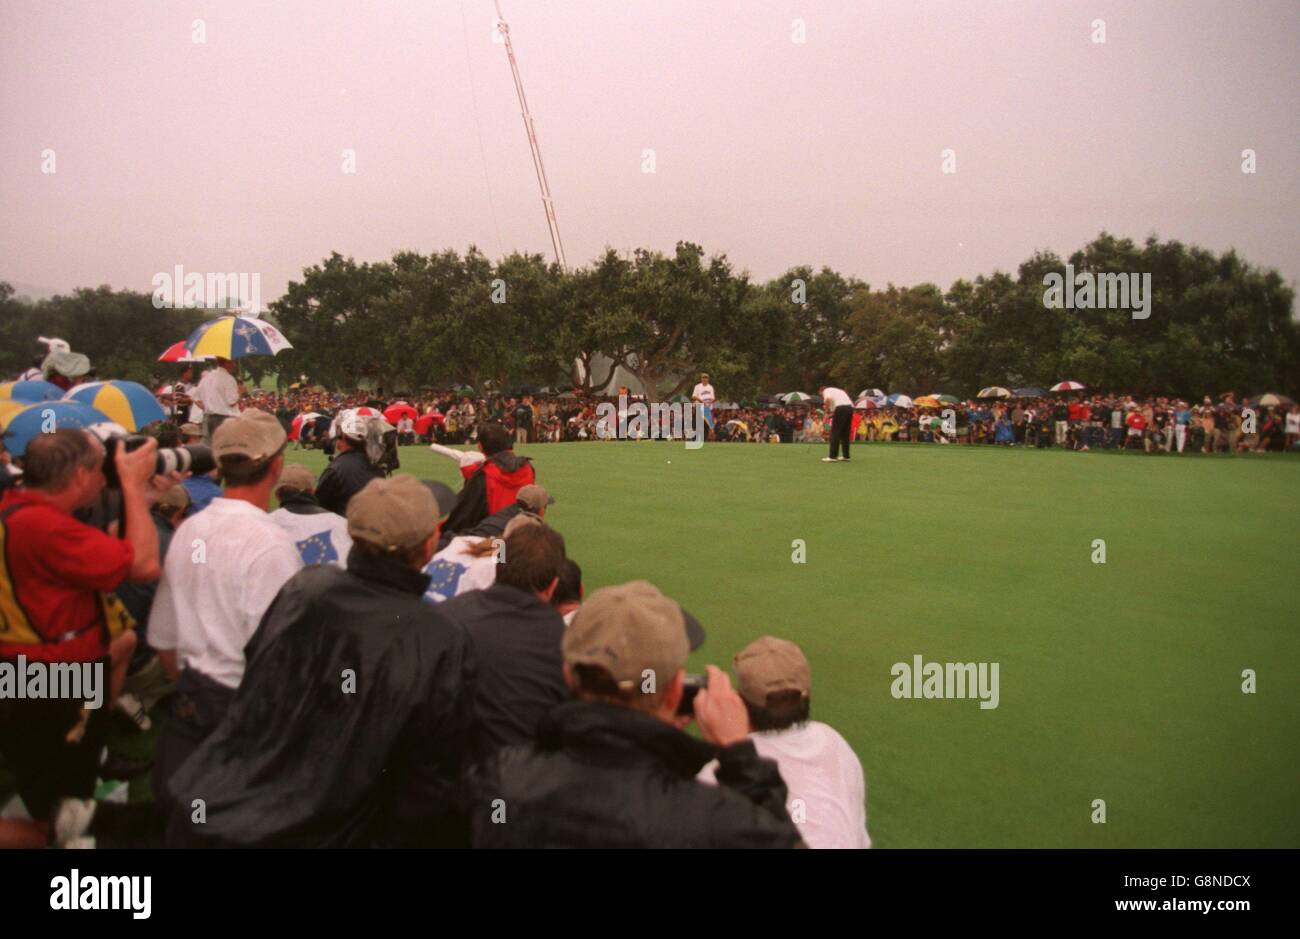 Golf - Ryder Cup - Europe v USA - Valderrama Golf Club, Spain. Europe's Colin Montgomerie putts at the eighteenth hole to win the match as the media and players crowd in Stock Photo